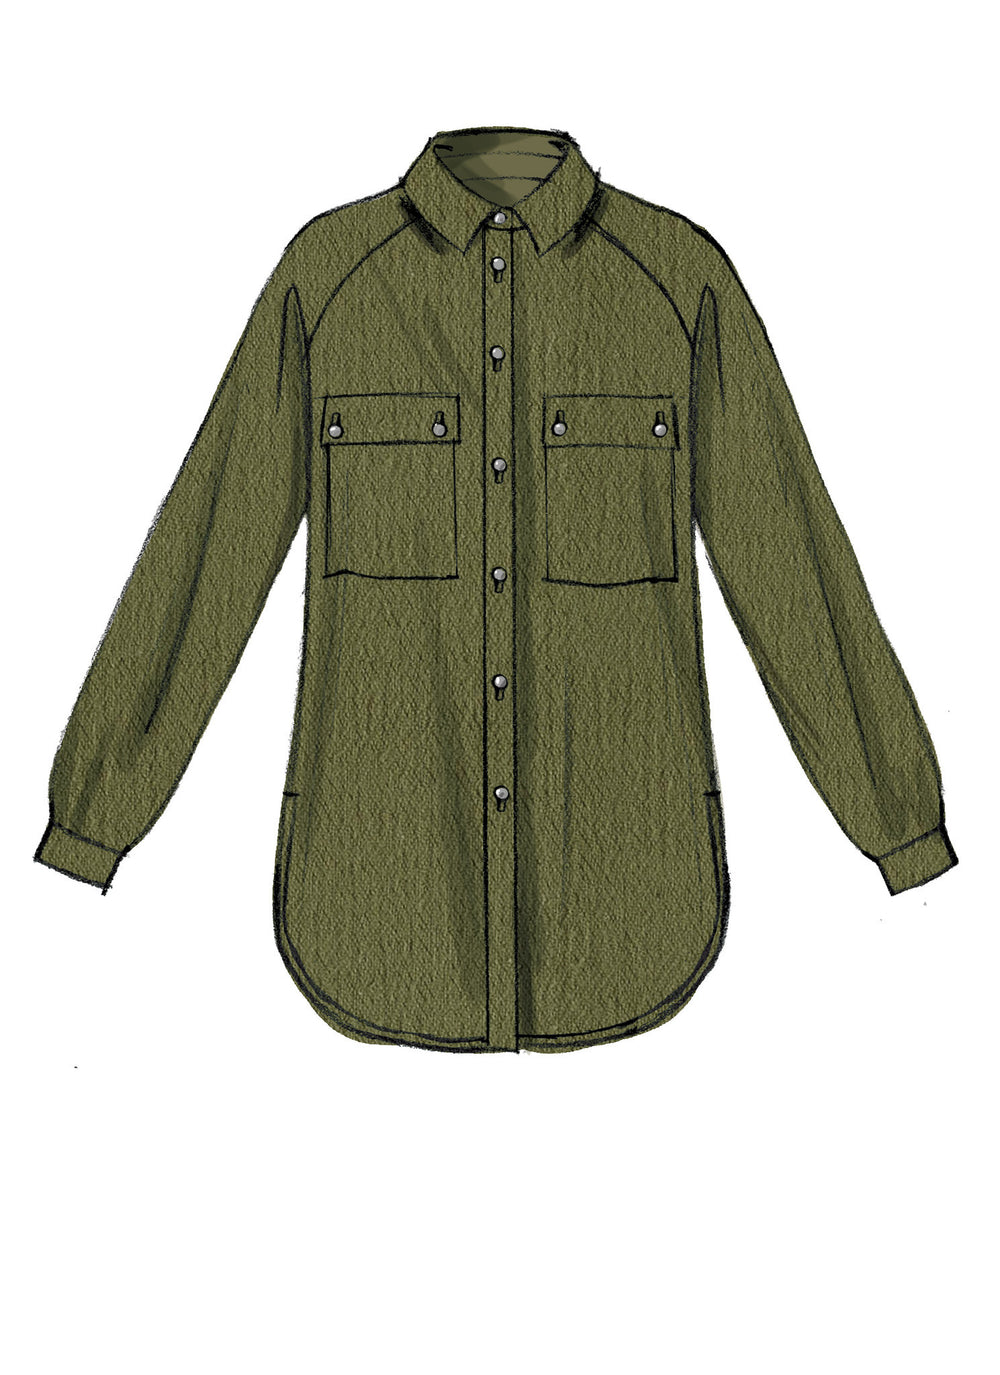 M7472 Misses' Raglan Sleeve, Button-Down Shirts and Tunics from Jaycotts Sewing Supplies